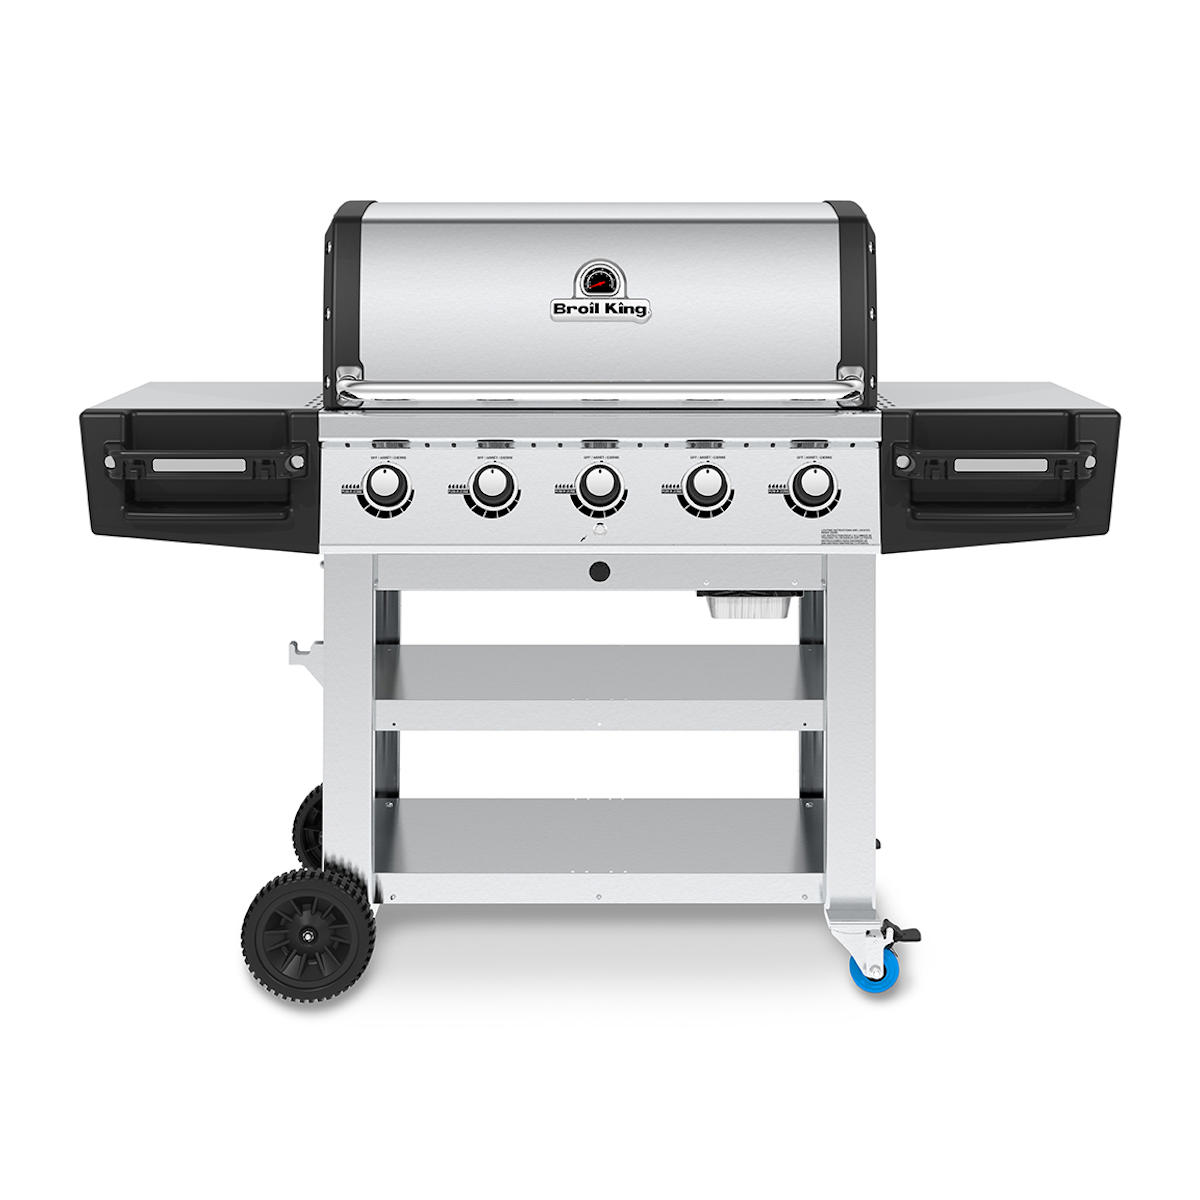 Broil King Regal S 520 Commercial, Gastronomie Grill